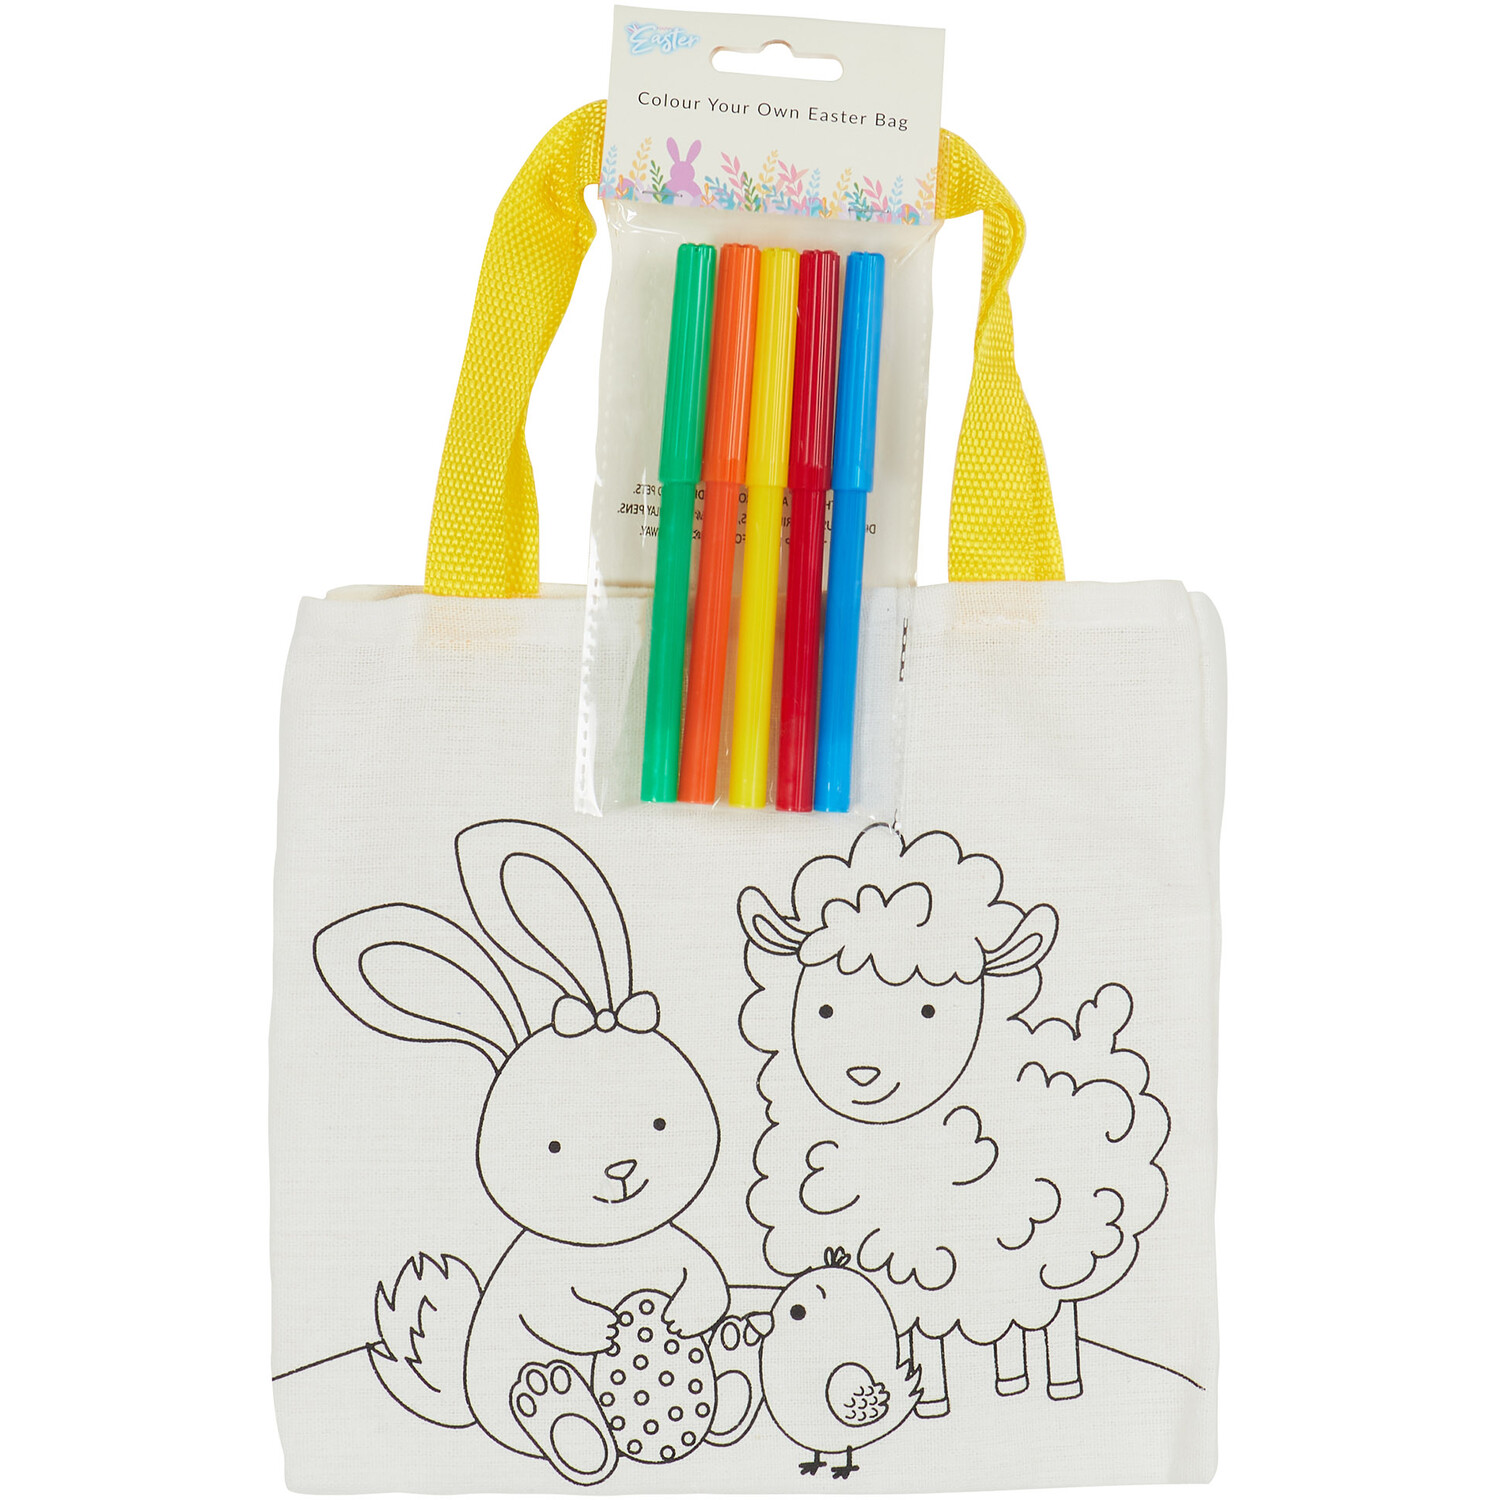 Colour Your Own Easter Bag Image 2